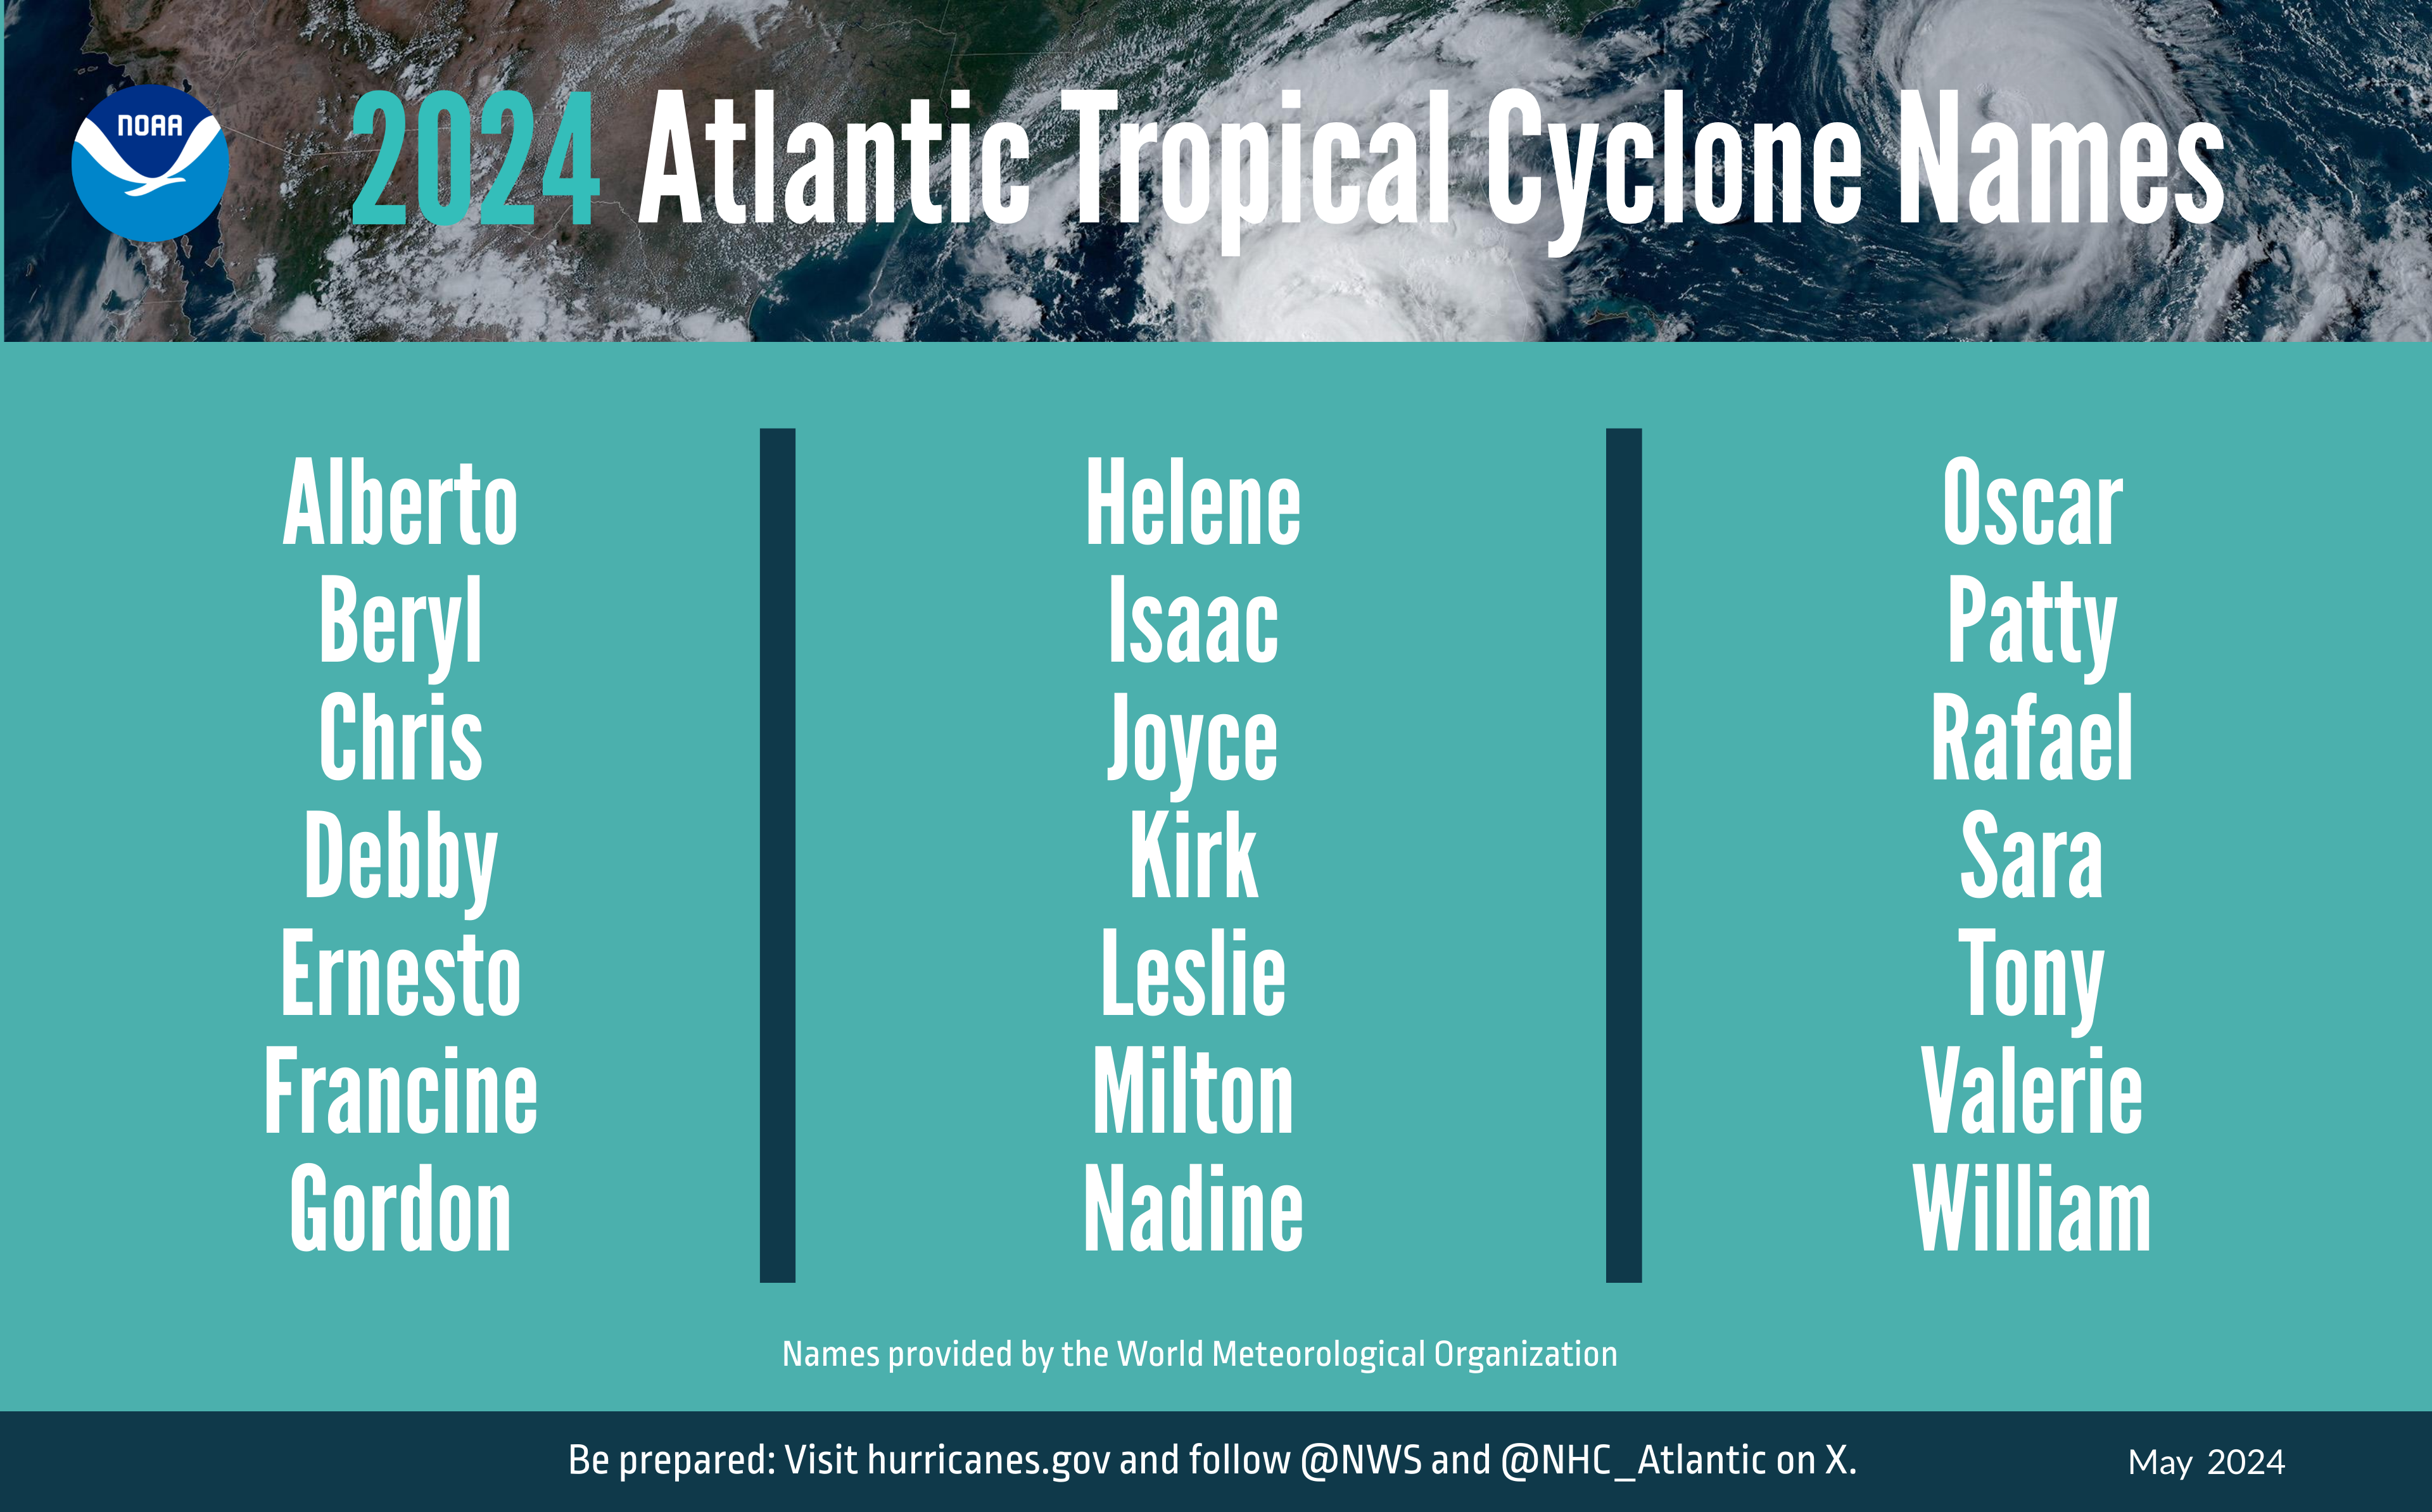 A summary graphic showing an alphabetical list of the 2024 Atlantic tropical cyclone names as selected by the World Meteorological Organization. The official start of the Atlantic hurricane season is June 1 and runs through November 30.